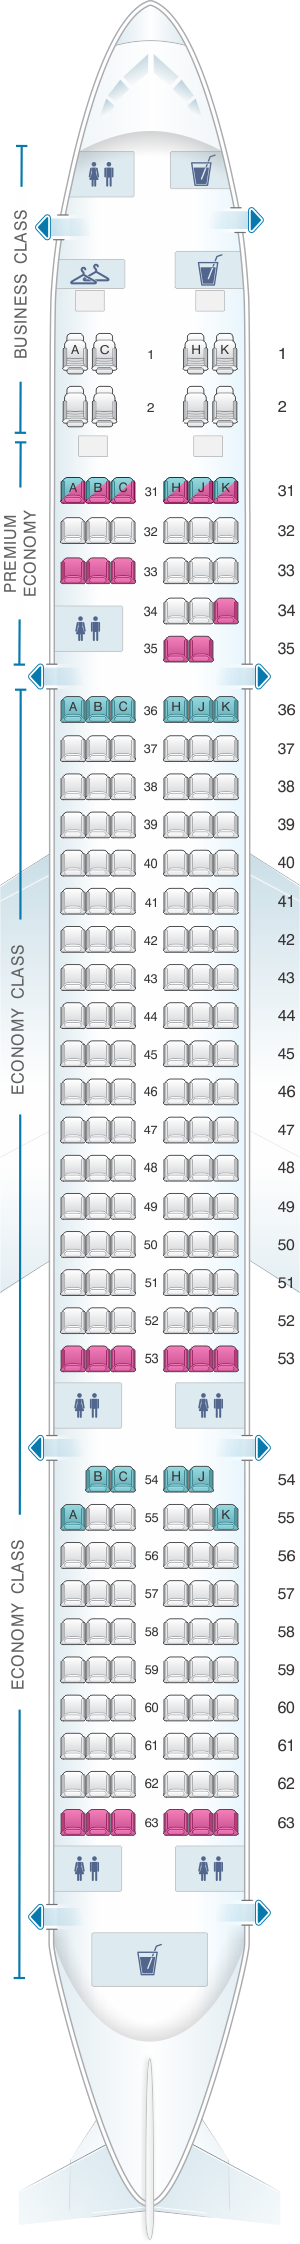 Seat map for China Southern Airlines Boeing B757